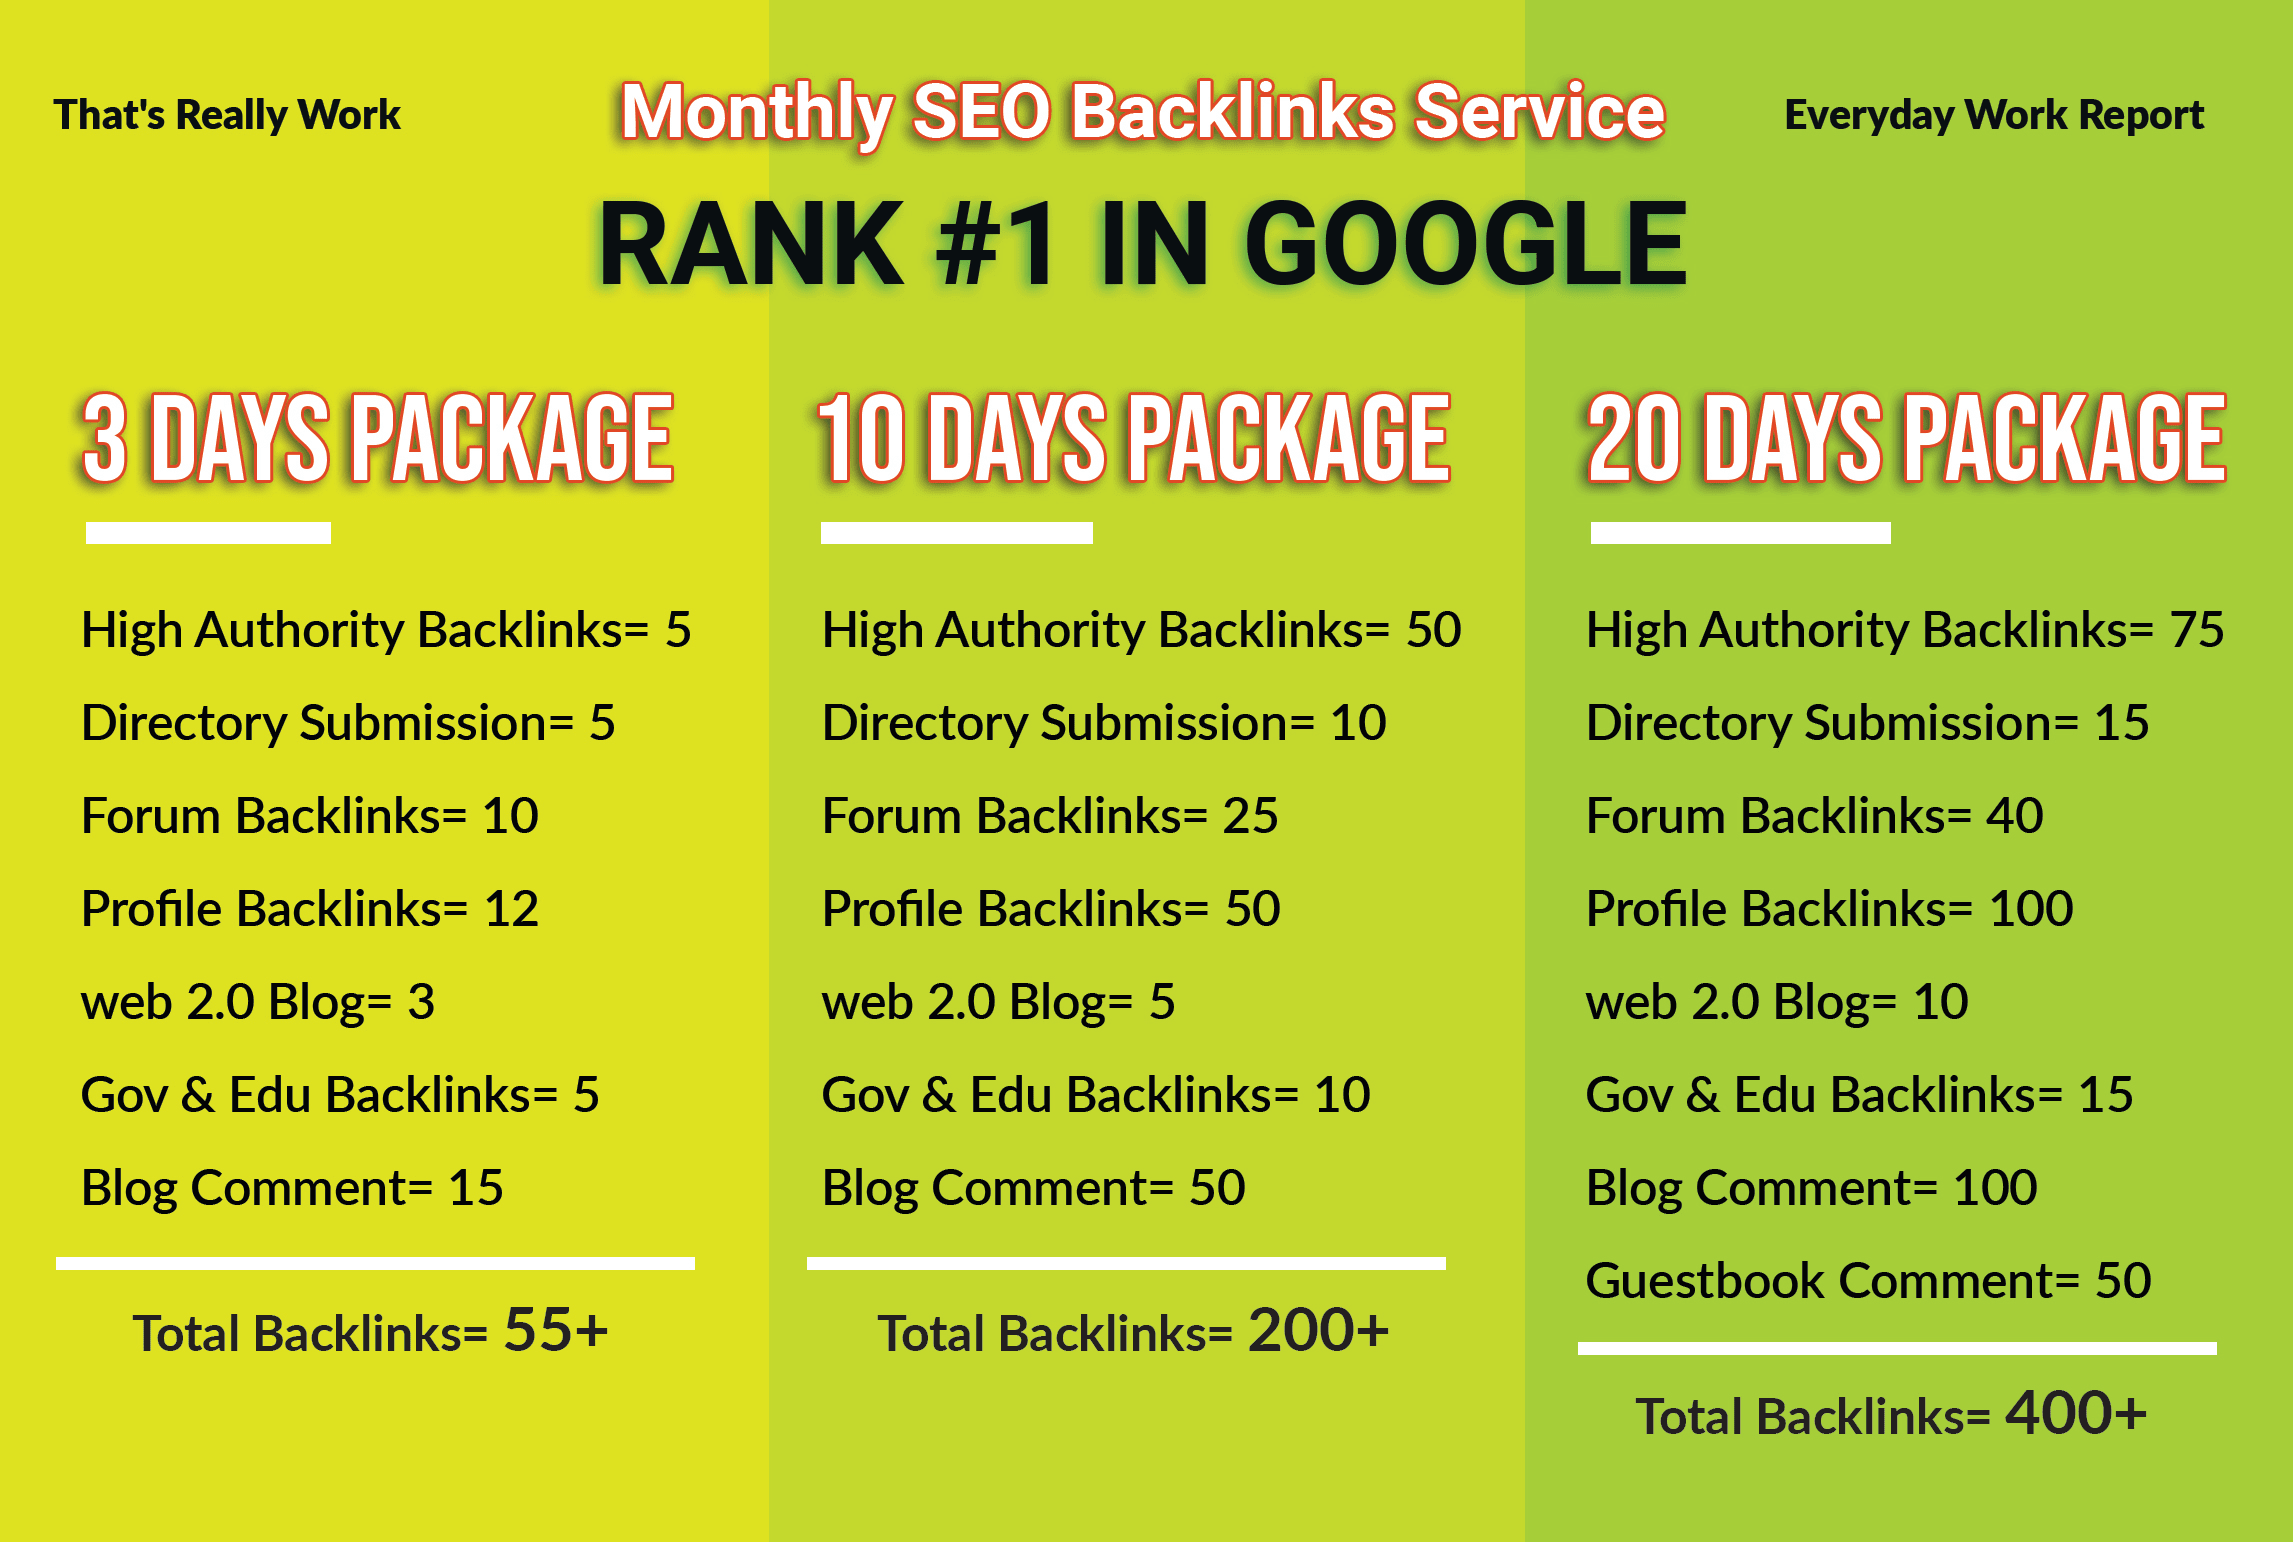 improve your google ranking with manual SEO backlinks service for $10 - SEOClerks